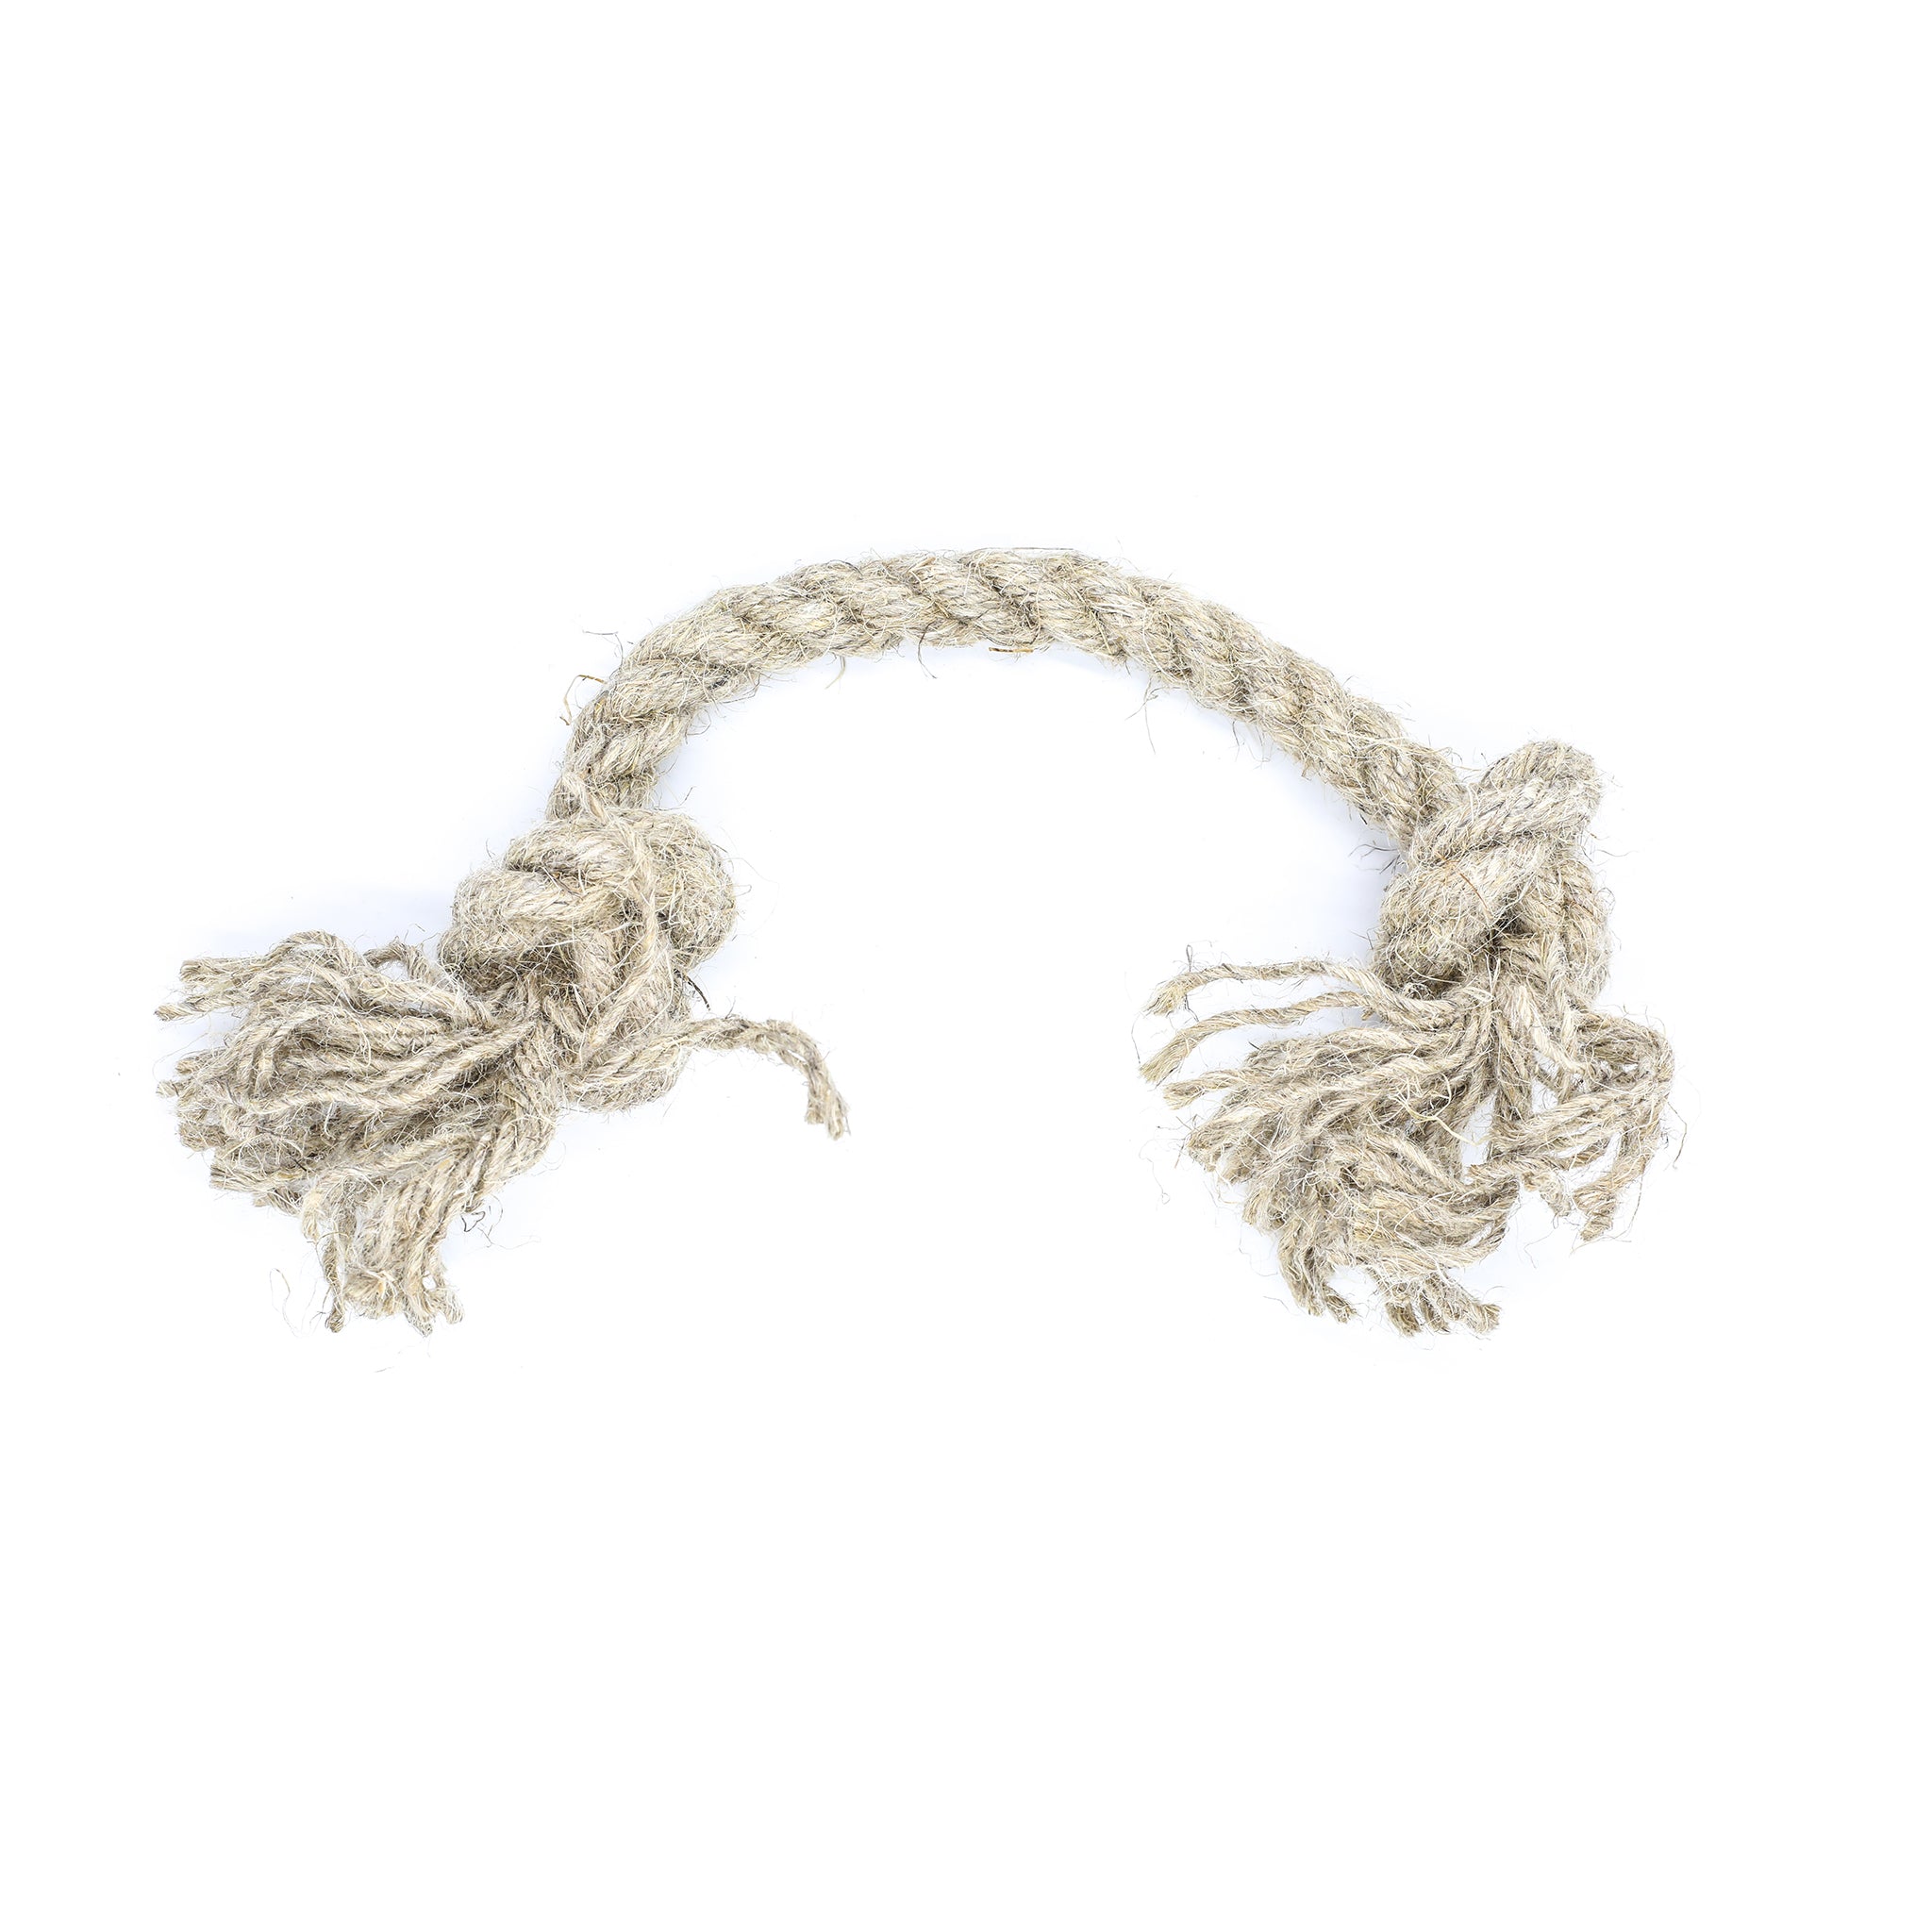 A small natural jute hemp knotted rope toy sits upon a white background. This natural knotted dog toy has two knots and this is the smaller size. The rope toy is lay in an arch across the white space